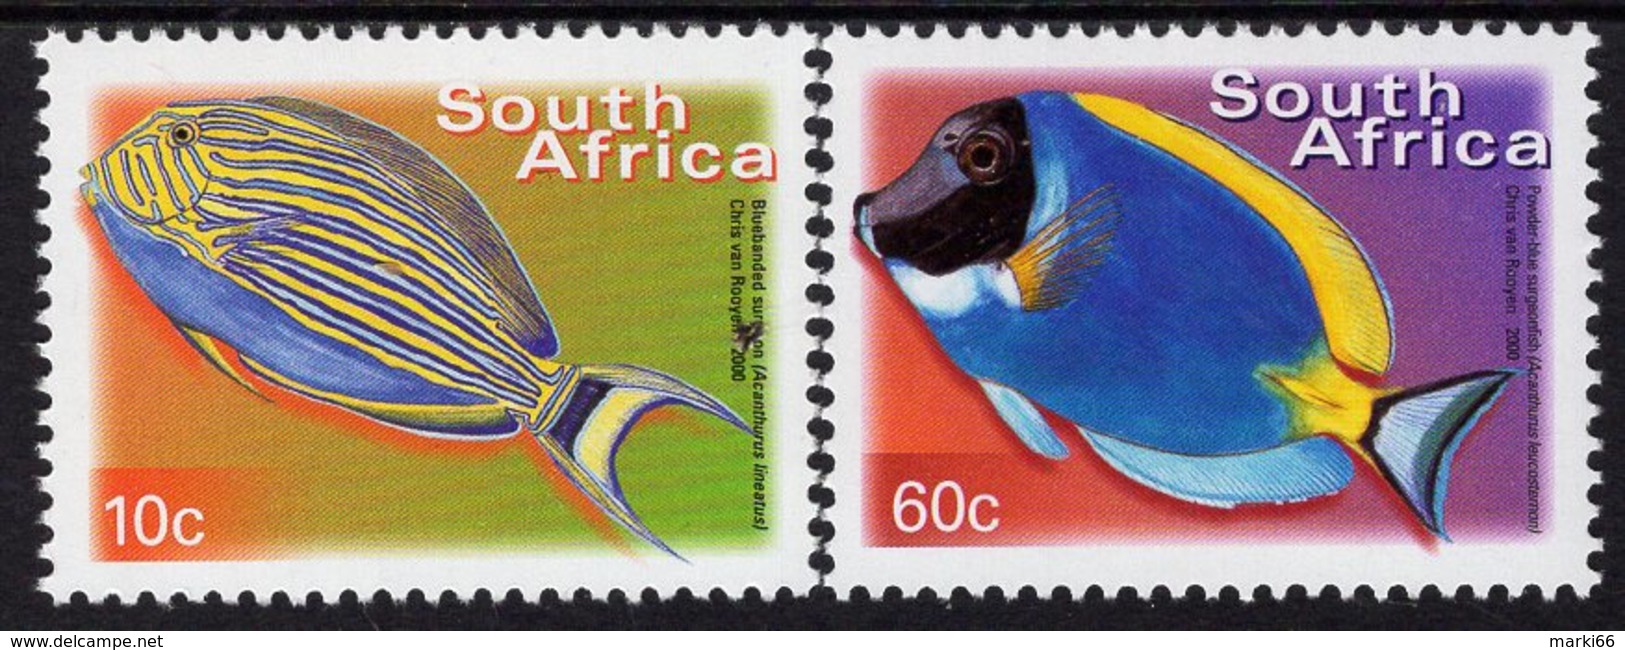 South Africa - 2014 - Colourful South Africa - Fish - 7th Definitive Series - Mint Stamp Set - Unused Stamps